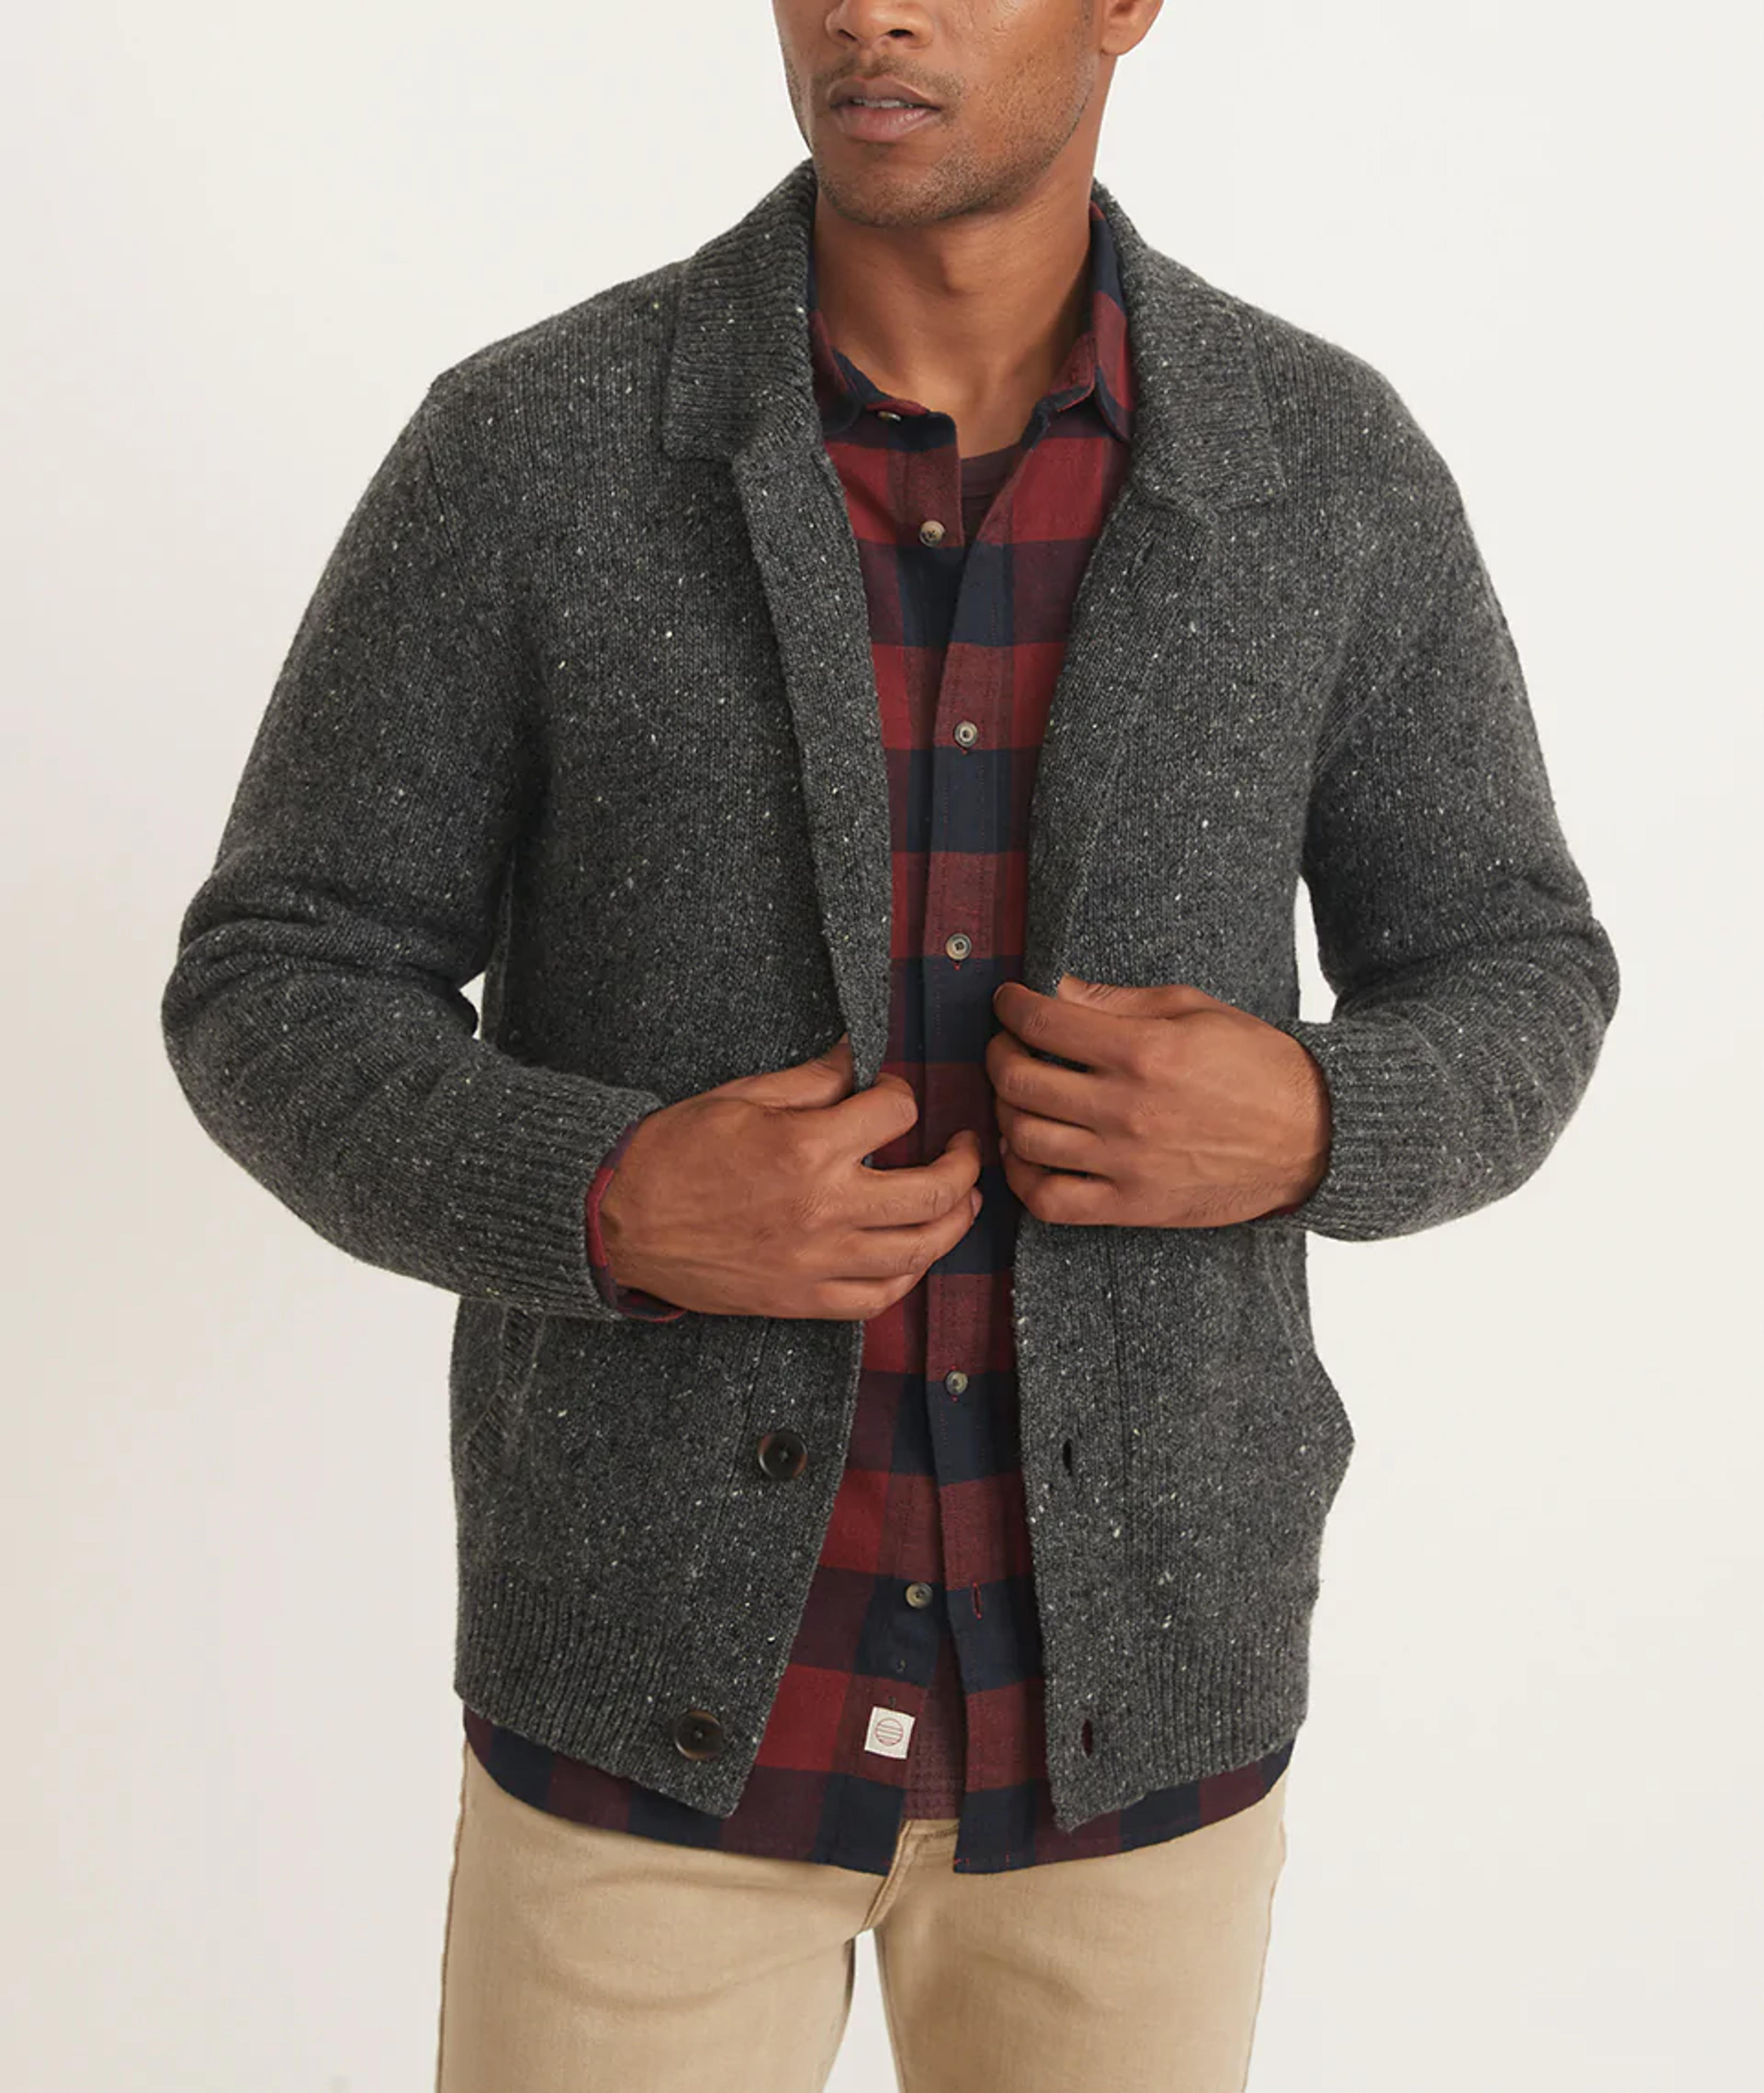 Parker Cardigan in Soot – Marine Layer